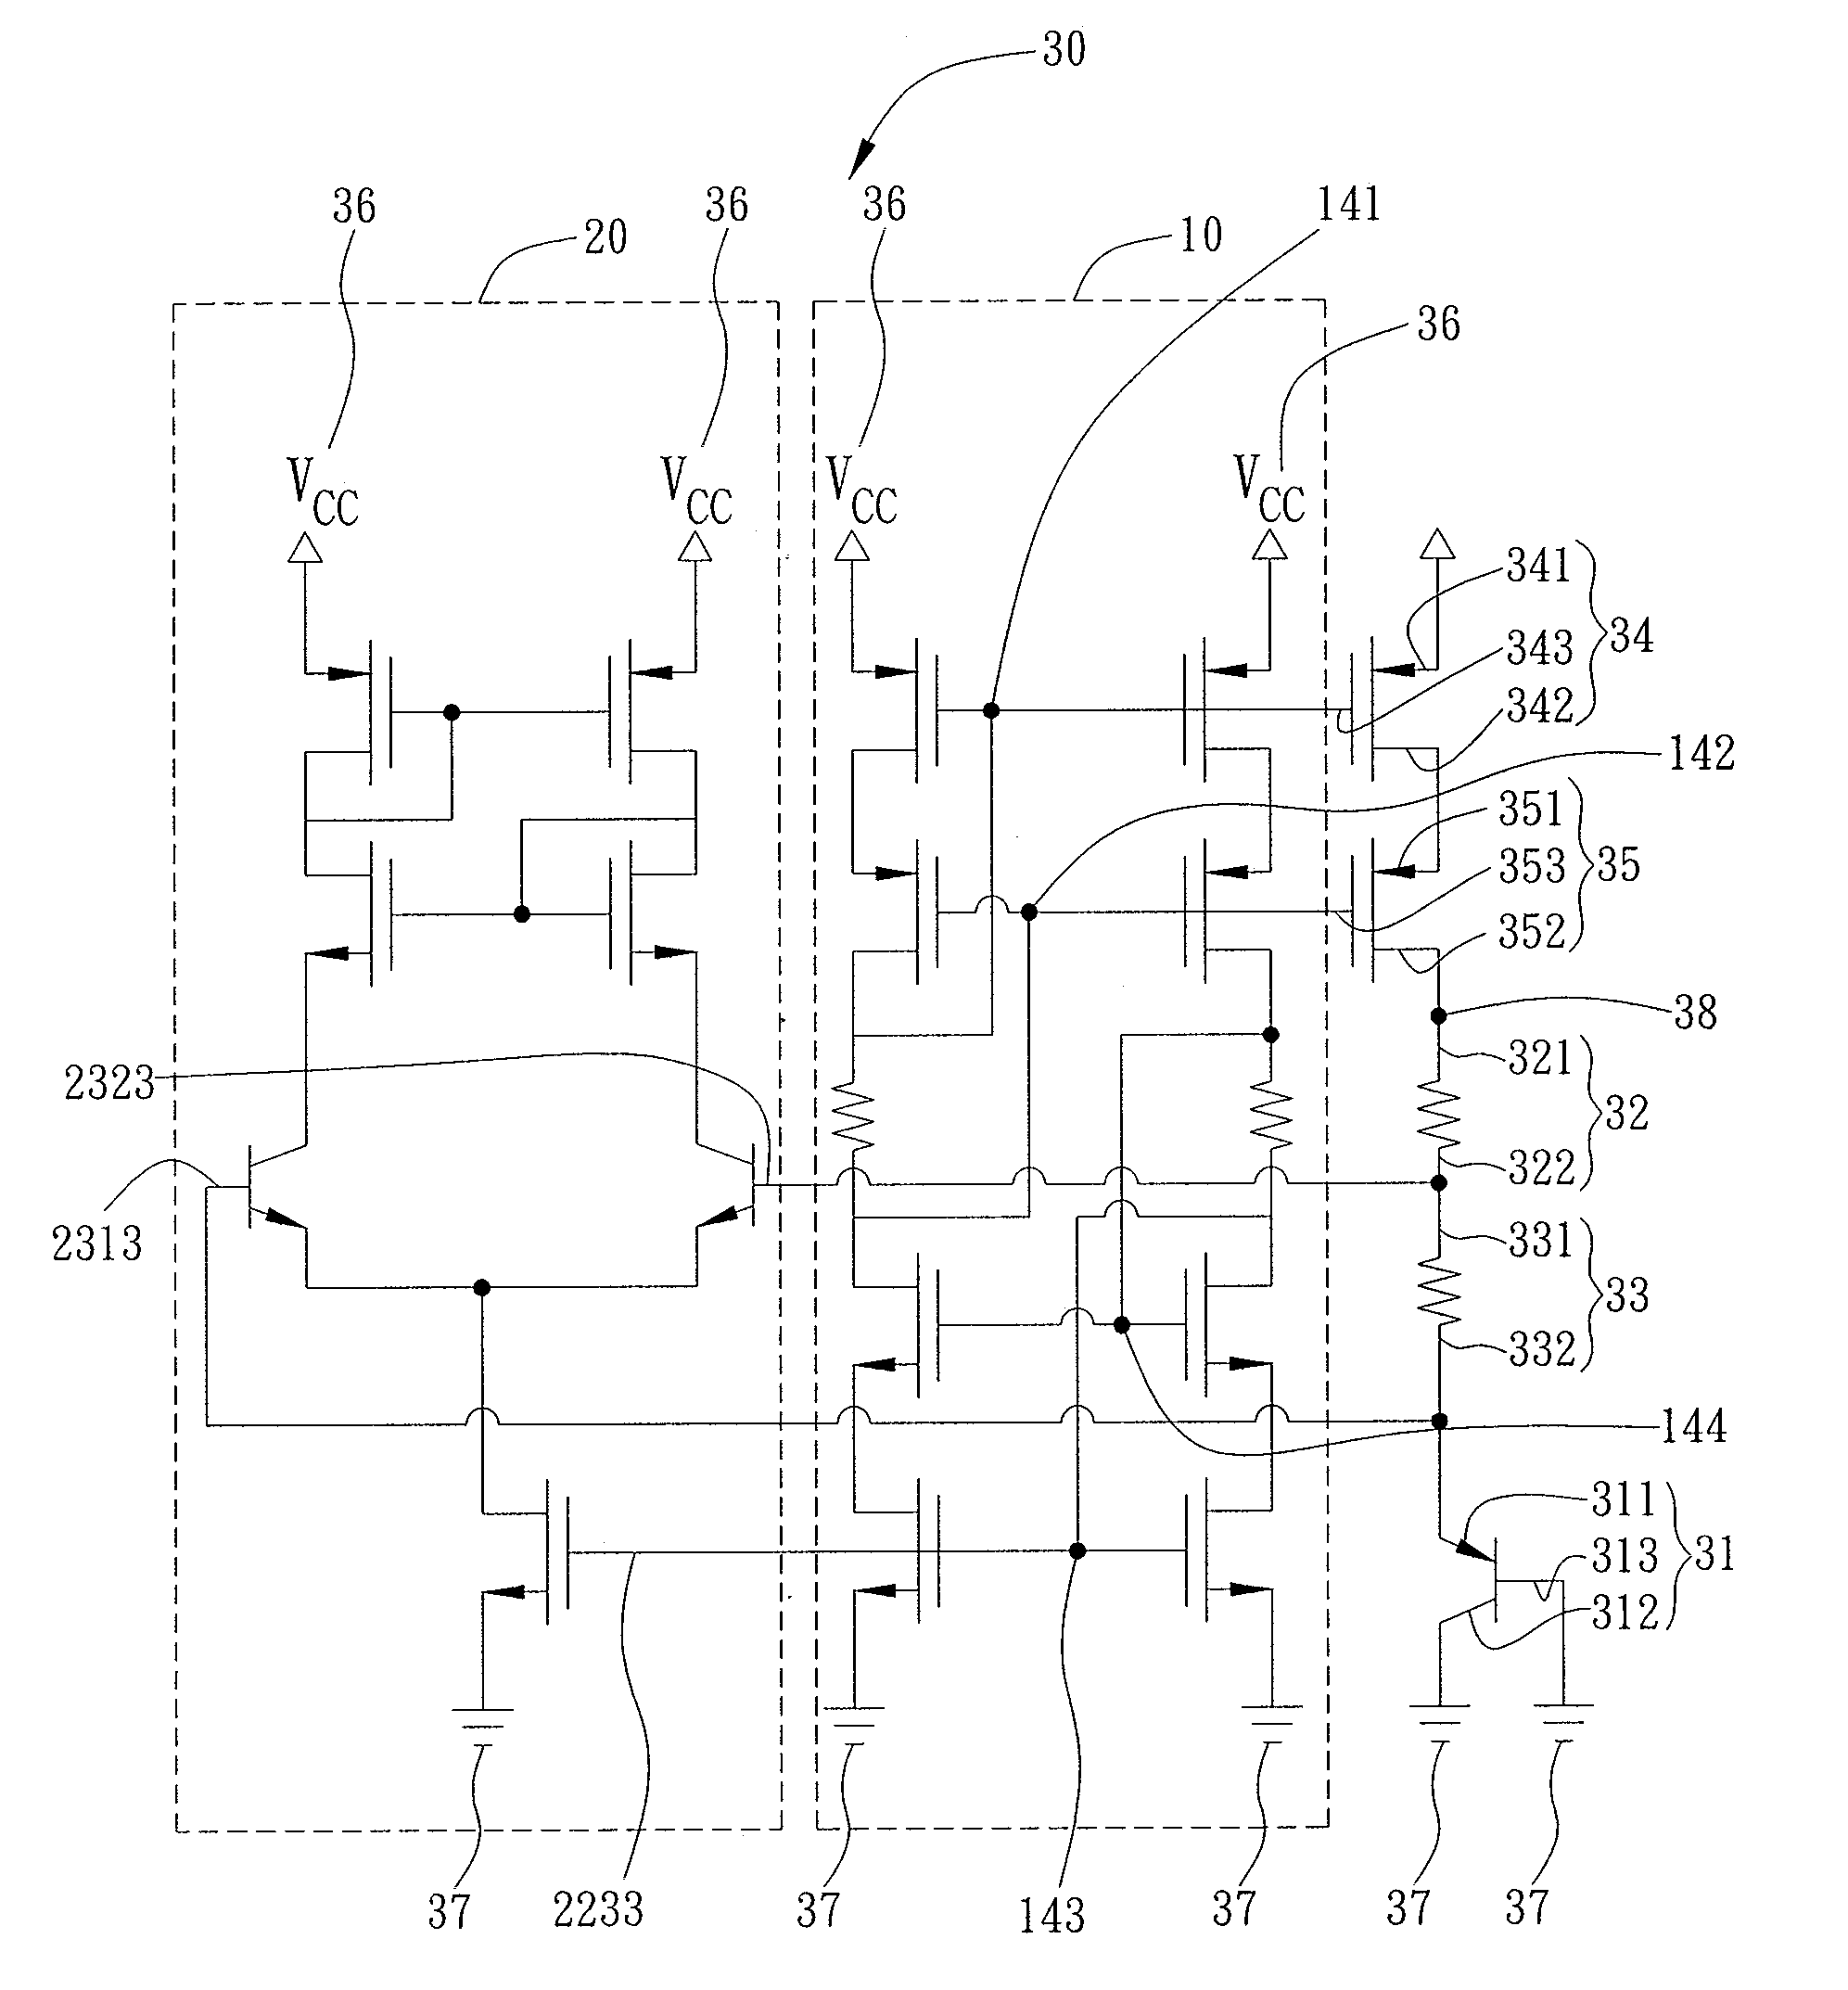 Cascode current mirror circuit, bandgap circuit, reference voltage circuit having the cascode current mirror circuit and the bandgap circuit, and voltage stabilizing/regulating circuit having the reference voltage circuit